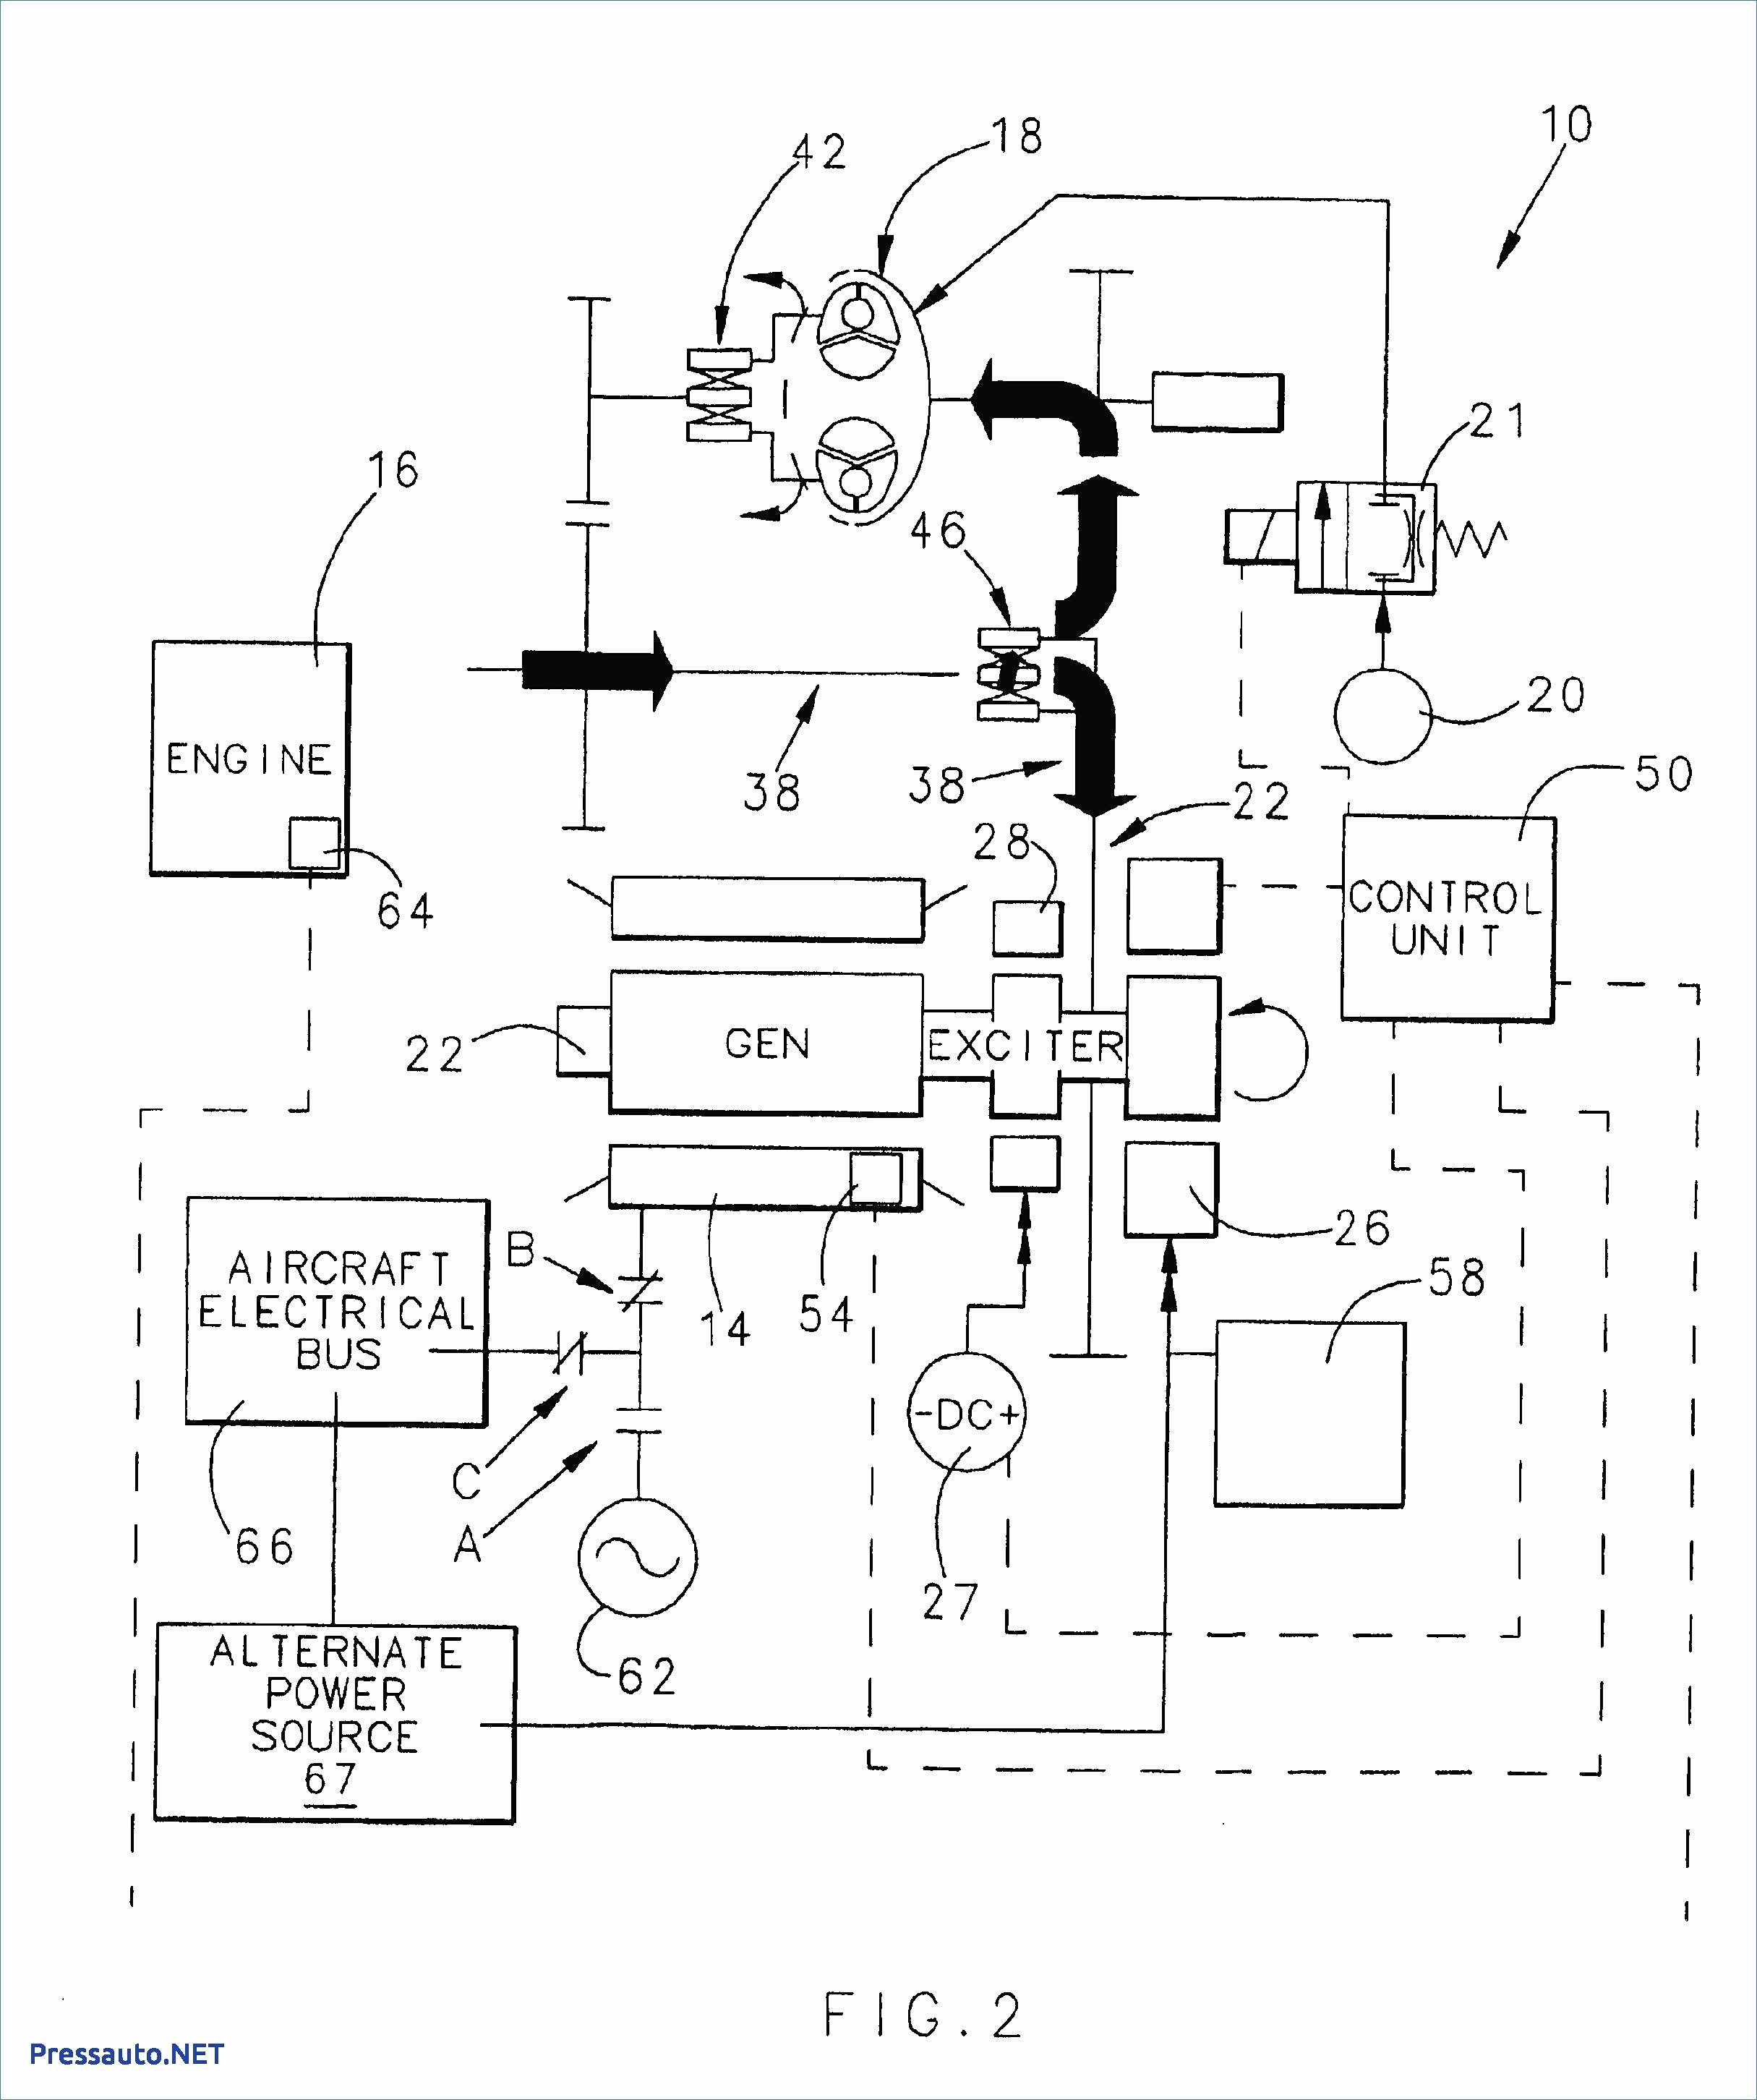 Wiring Diagram for Delco Remy Alternator Save Wiring Diagram Delco Remy Alternator Wiring Diagram New Starter